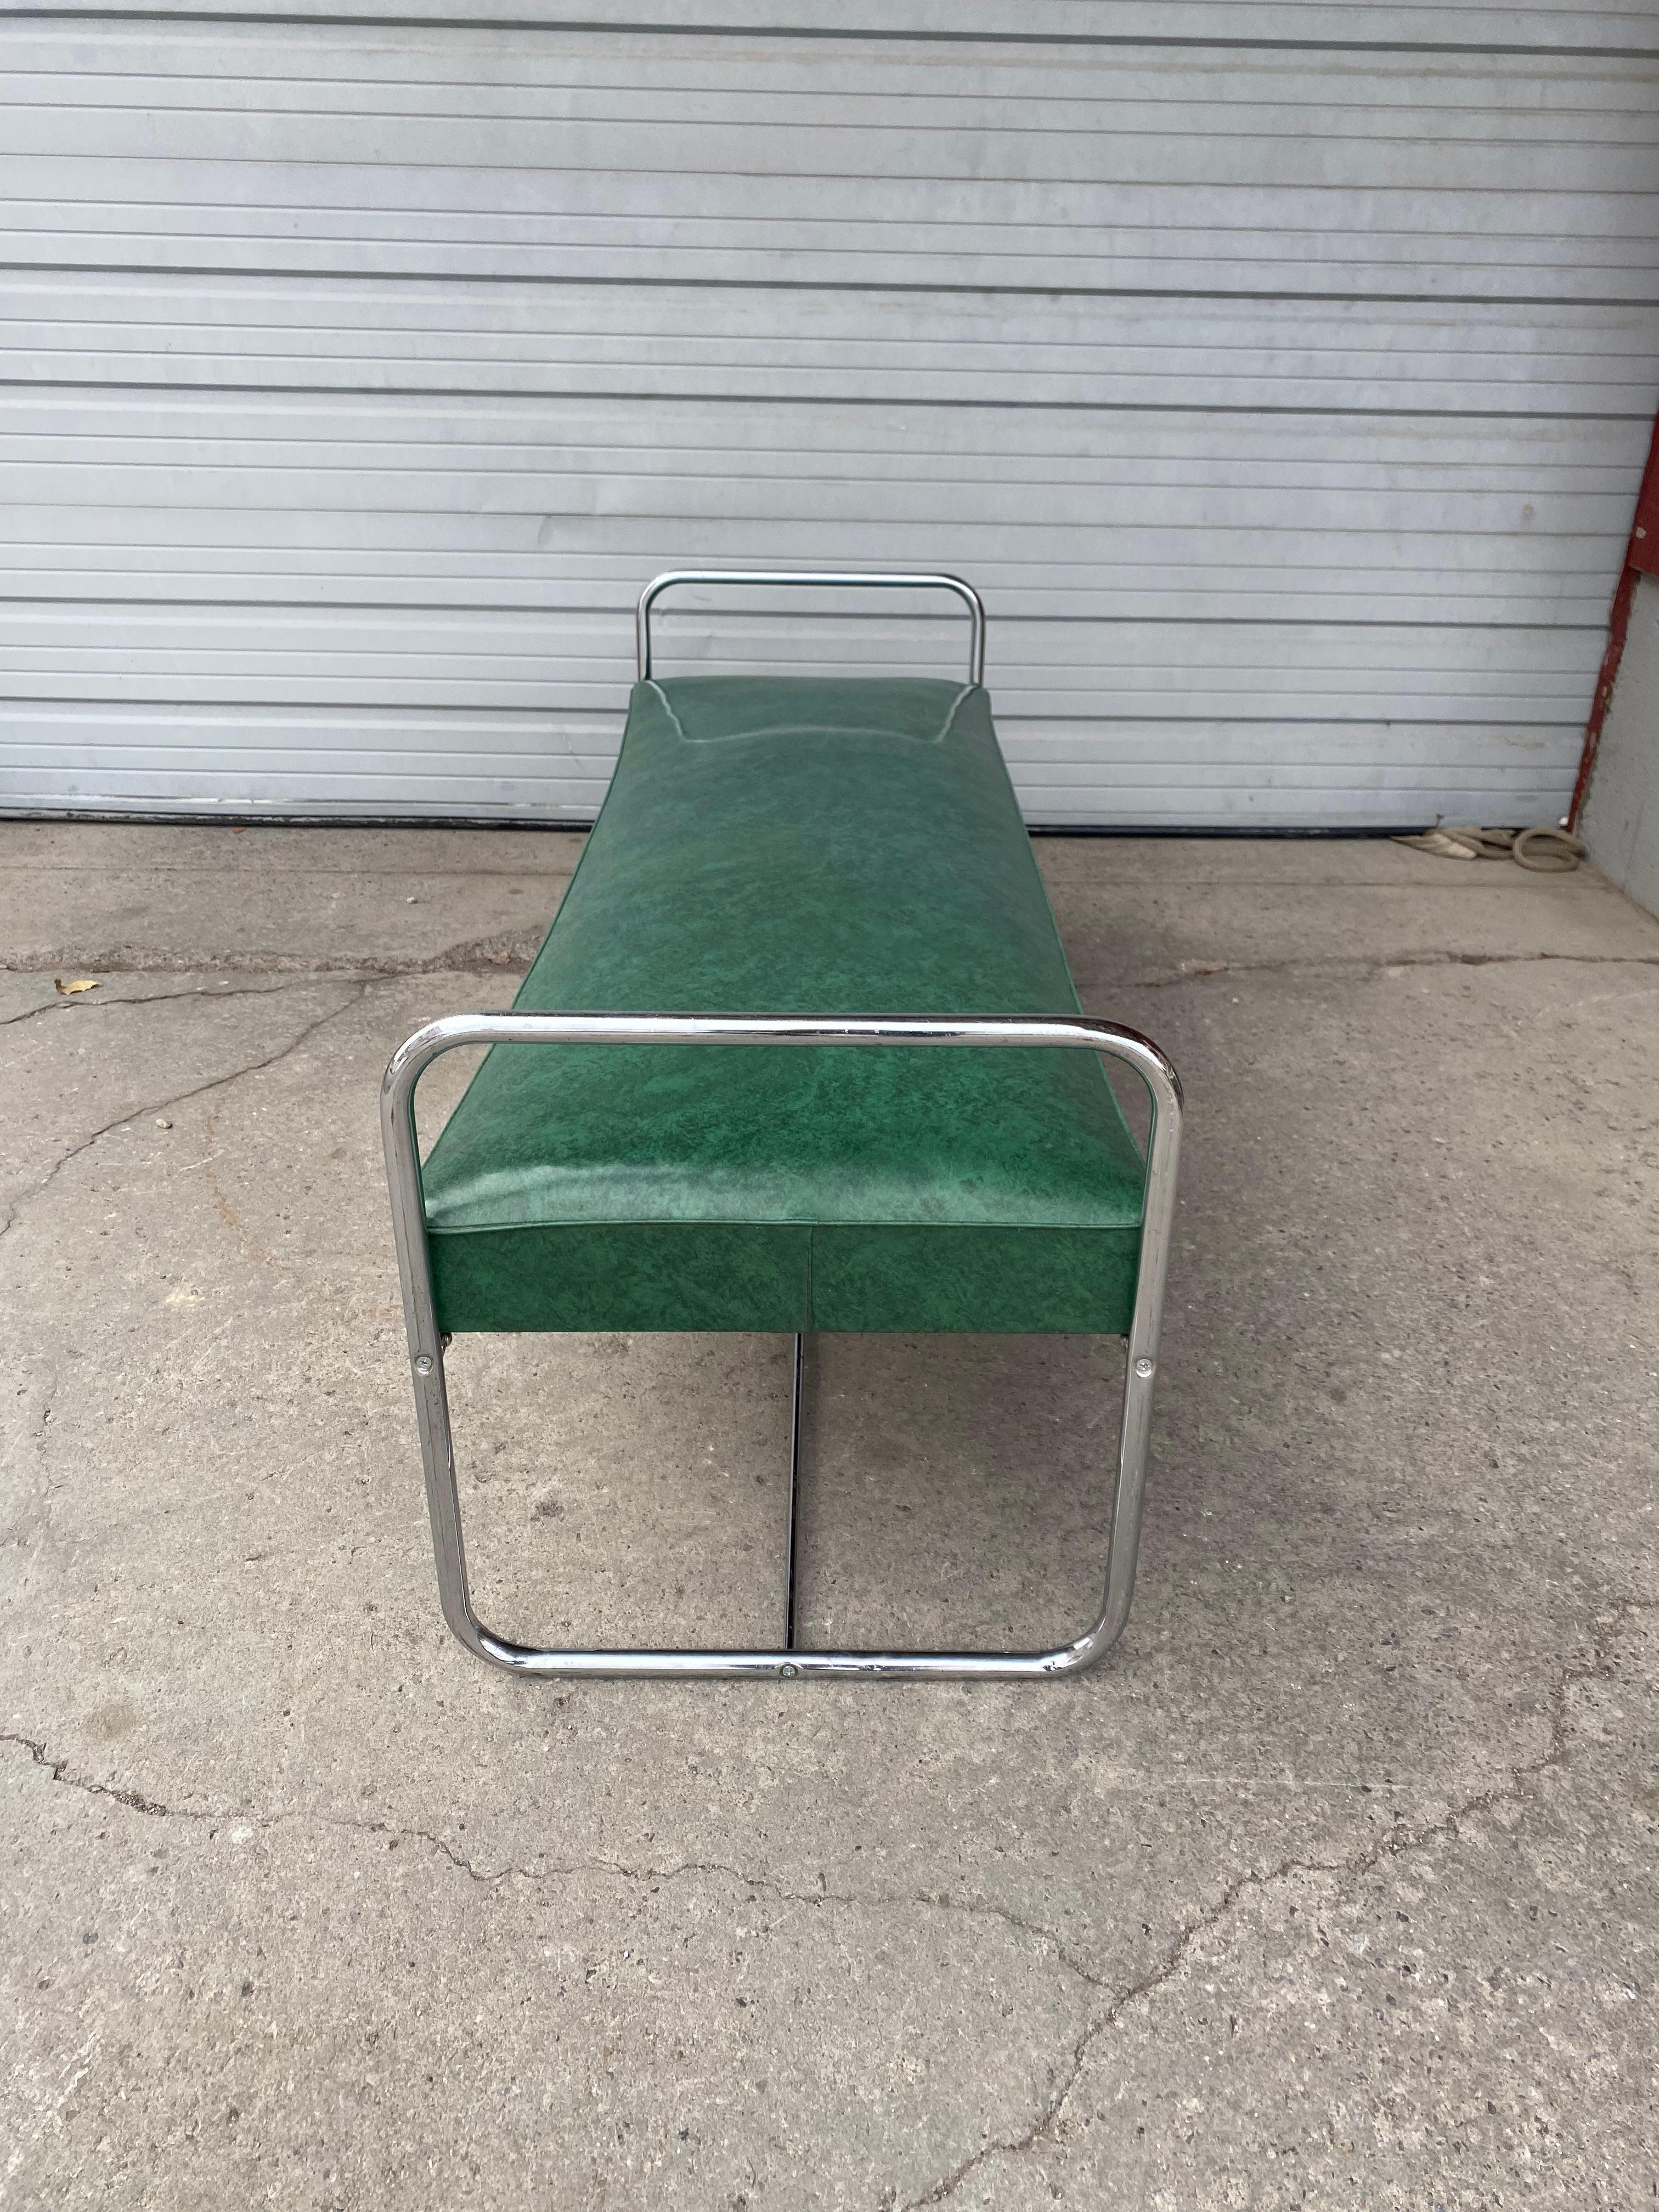 Art Deco / Bauhaus Tubular Chrome Bench Designed by Wolfgang Hoffmann, Howell In Good Condition For Sale In Buffalo, NY